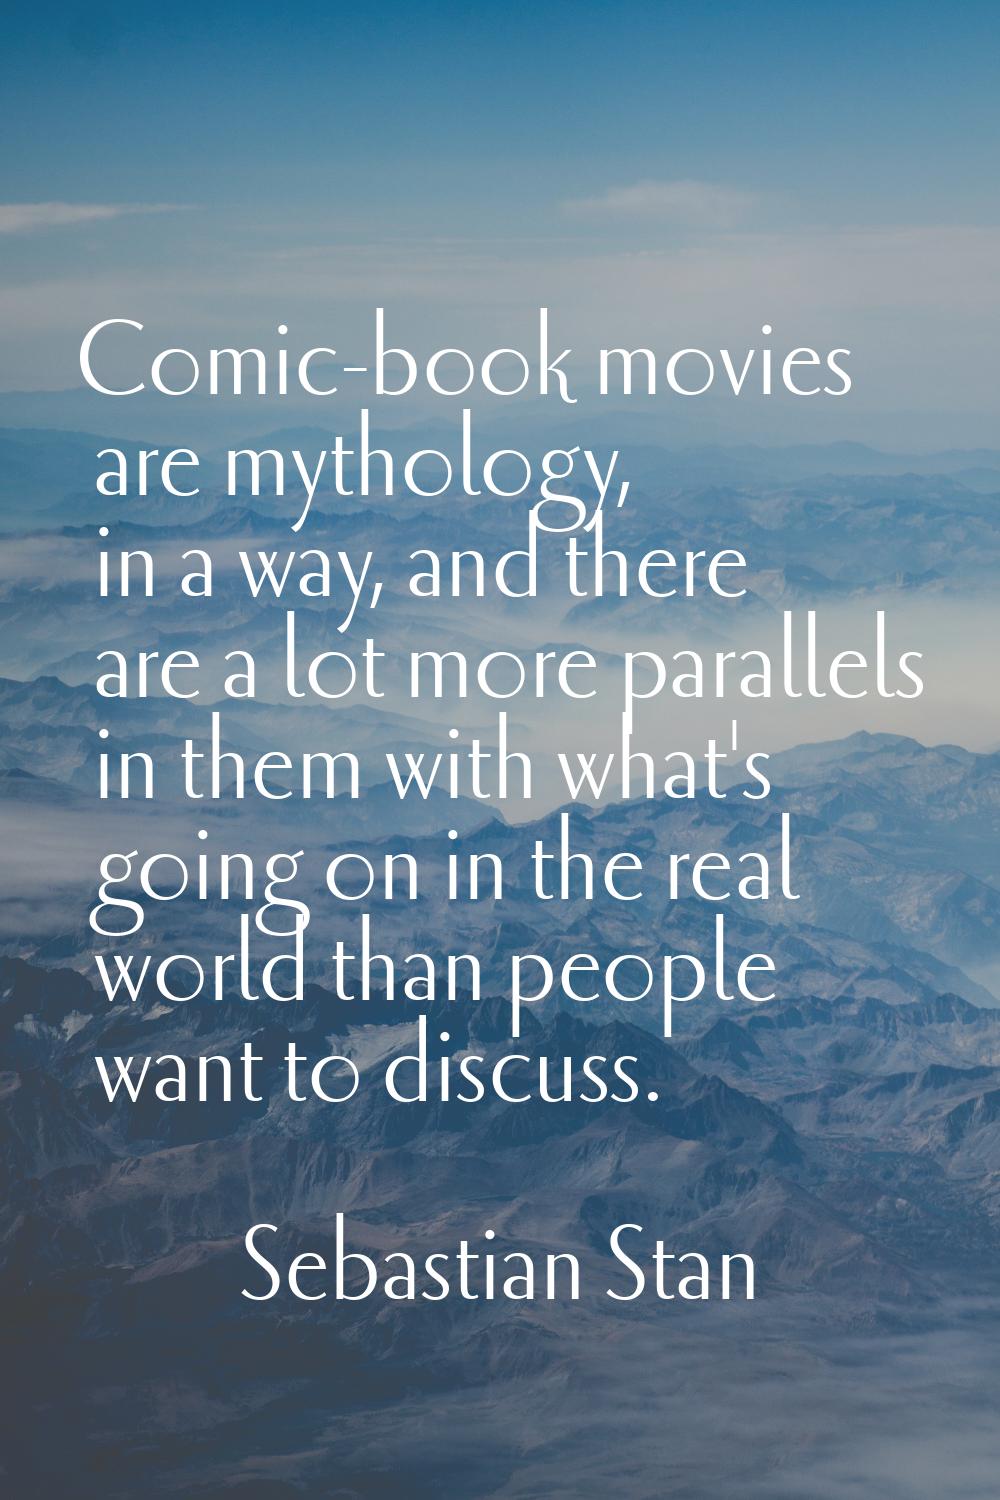 Comic-book movies are mythology, in a way, and there are a lot more parallels in them with what's g